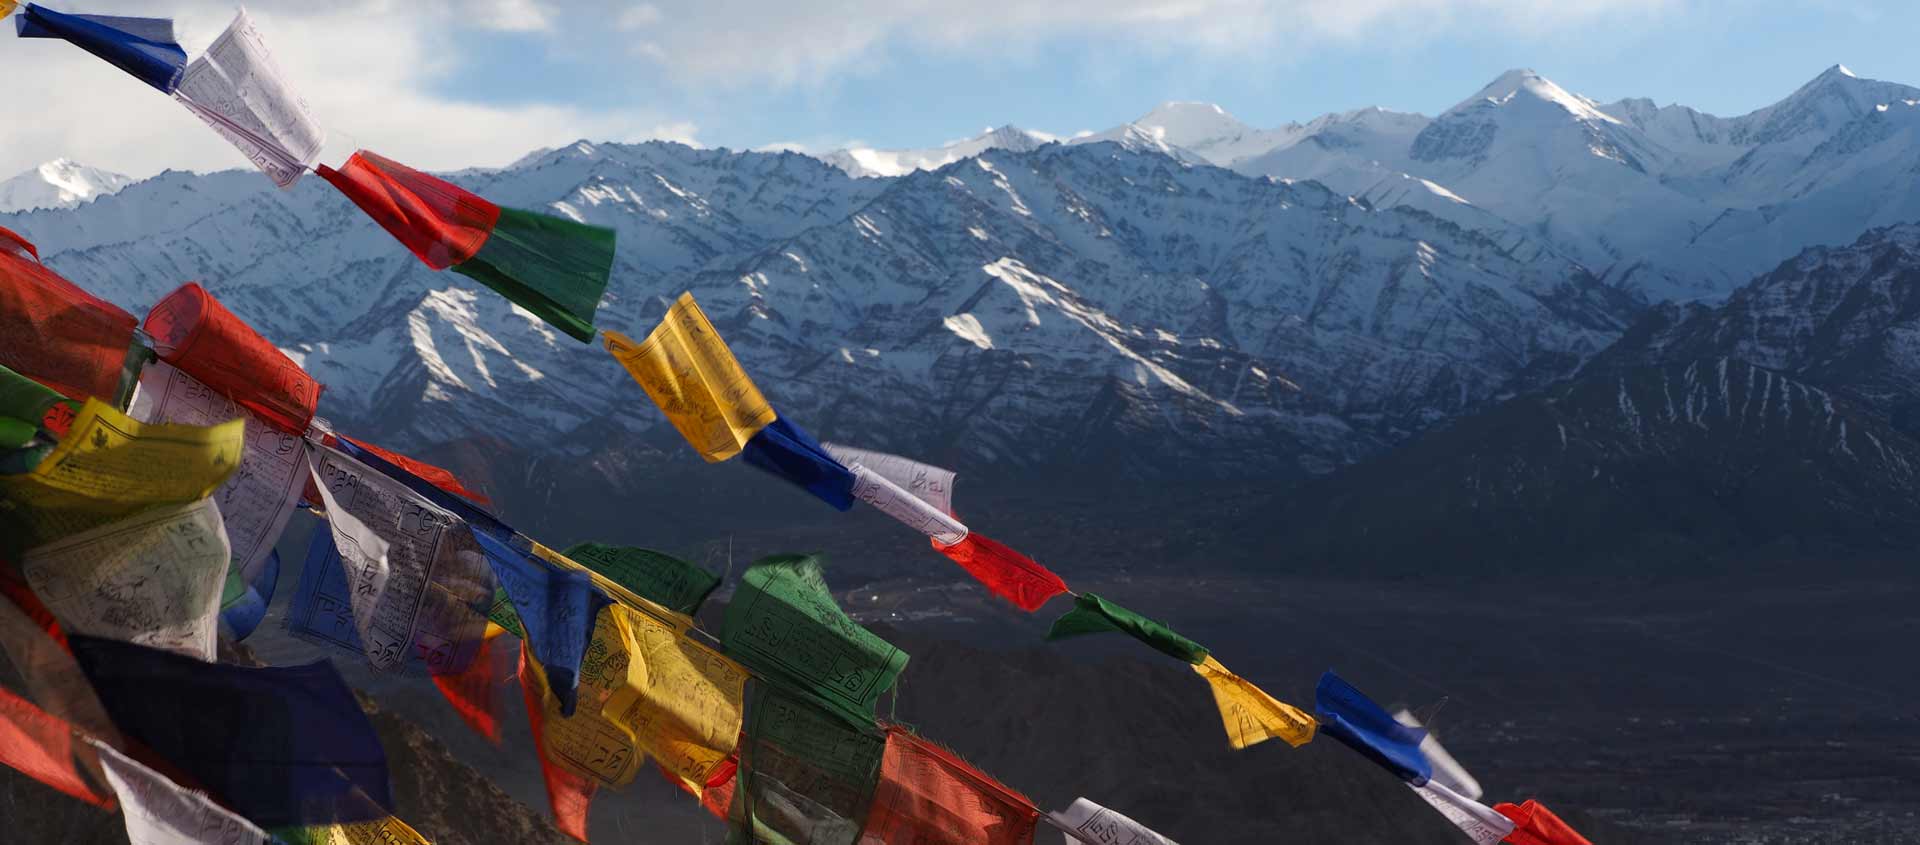 Tigers and Snow Leopards of India photo of prayer flags